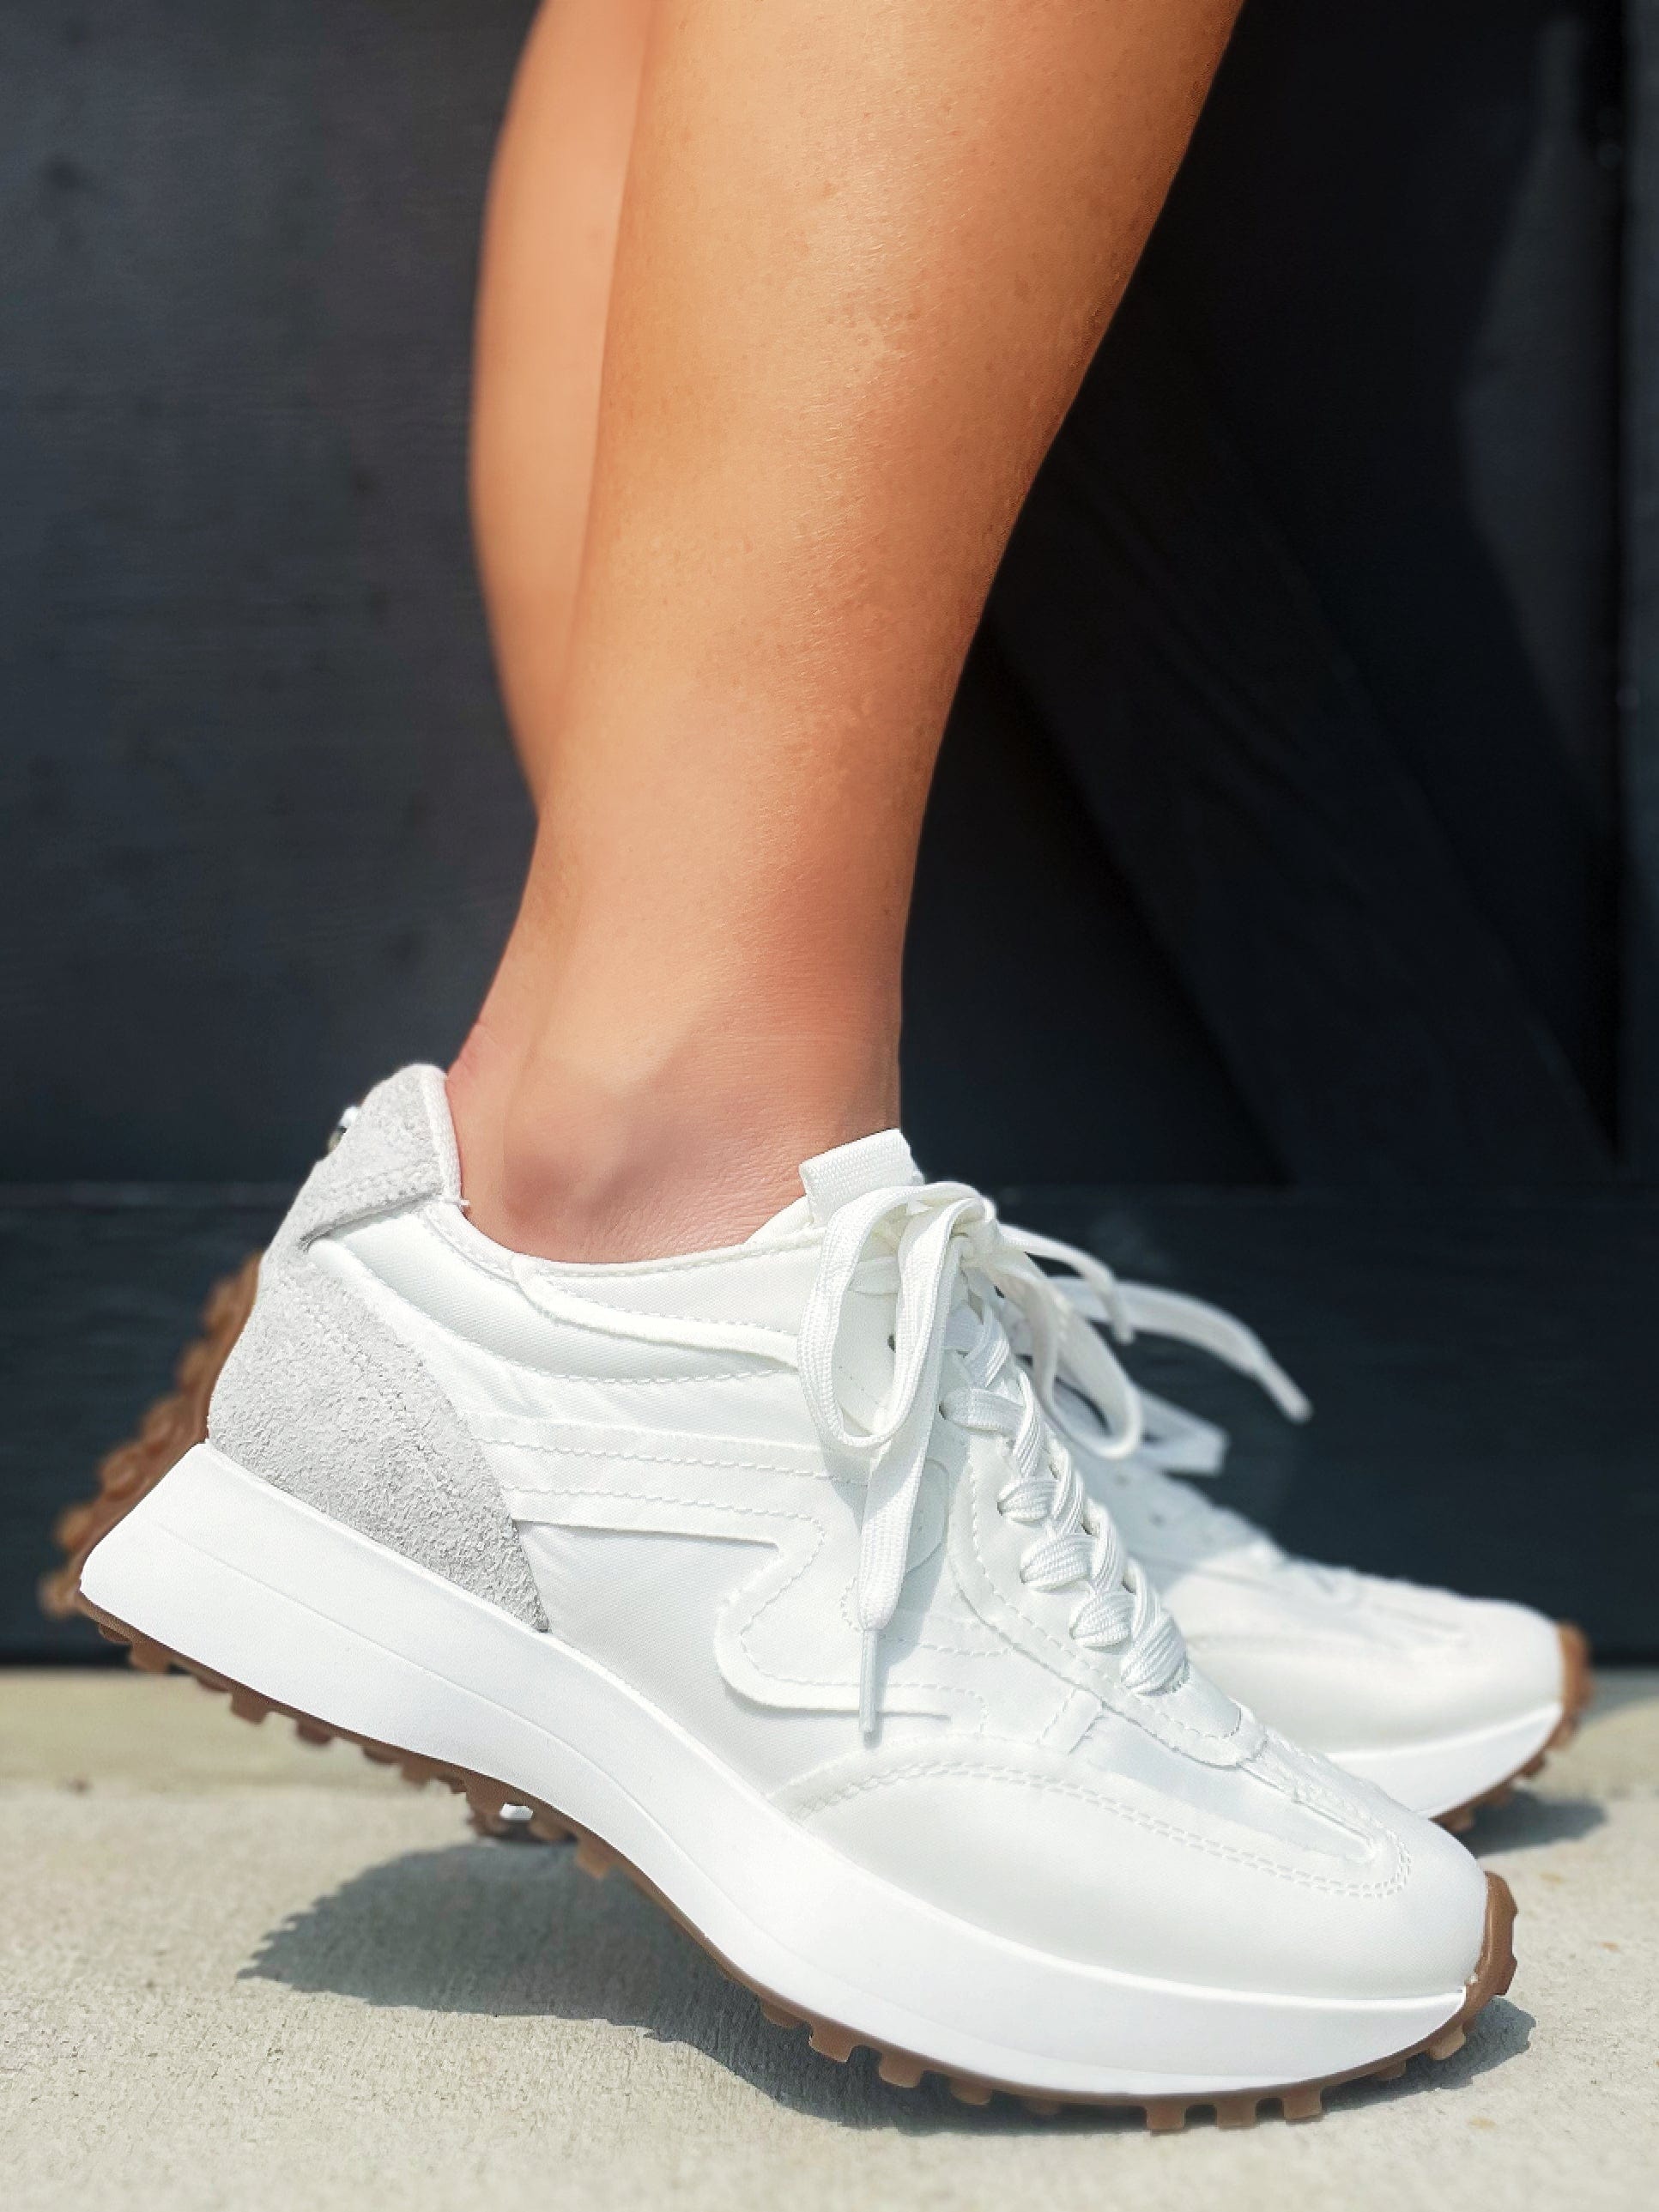 Steve Madden Campo Sneakers In White - Infinity Raine